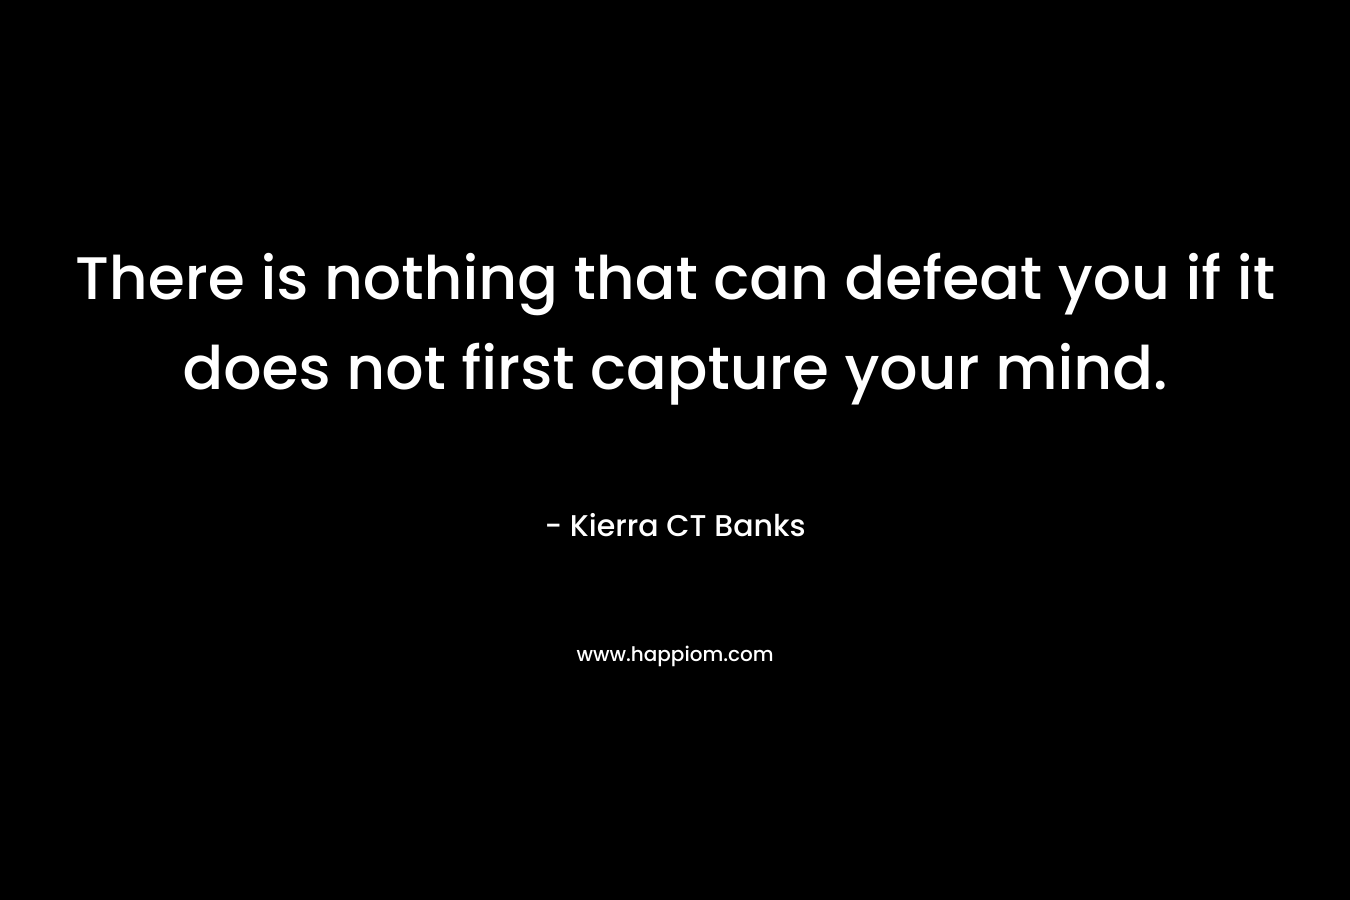 There is nothing that can defeat you if it does not first capture your mind.